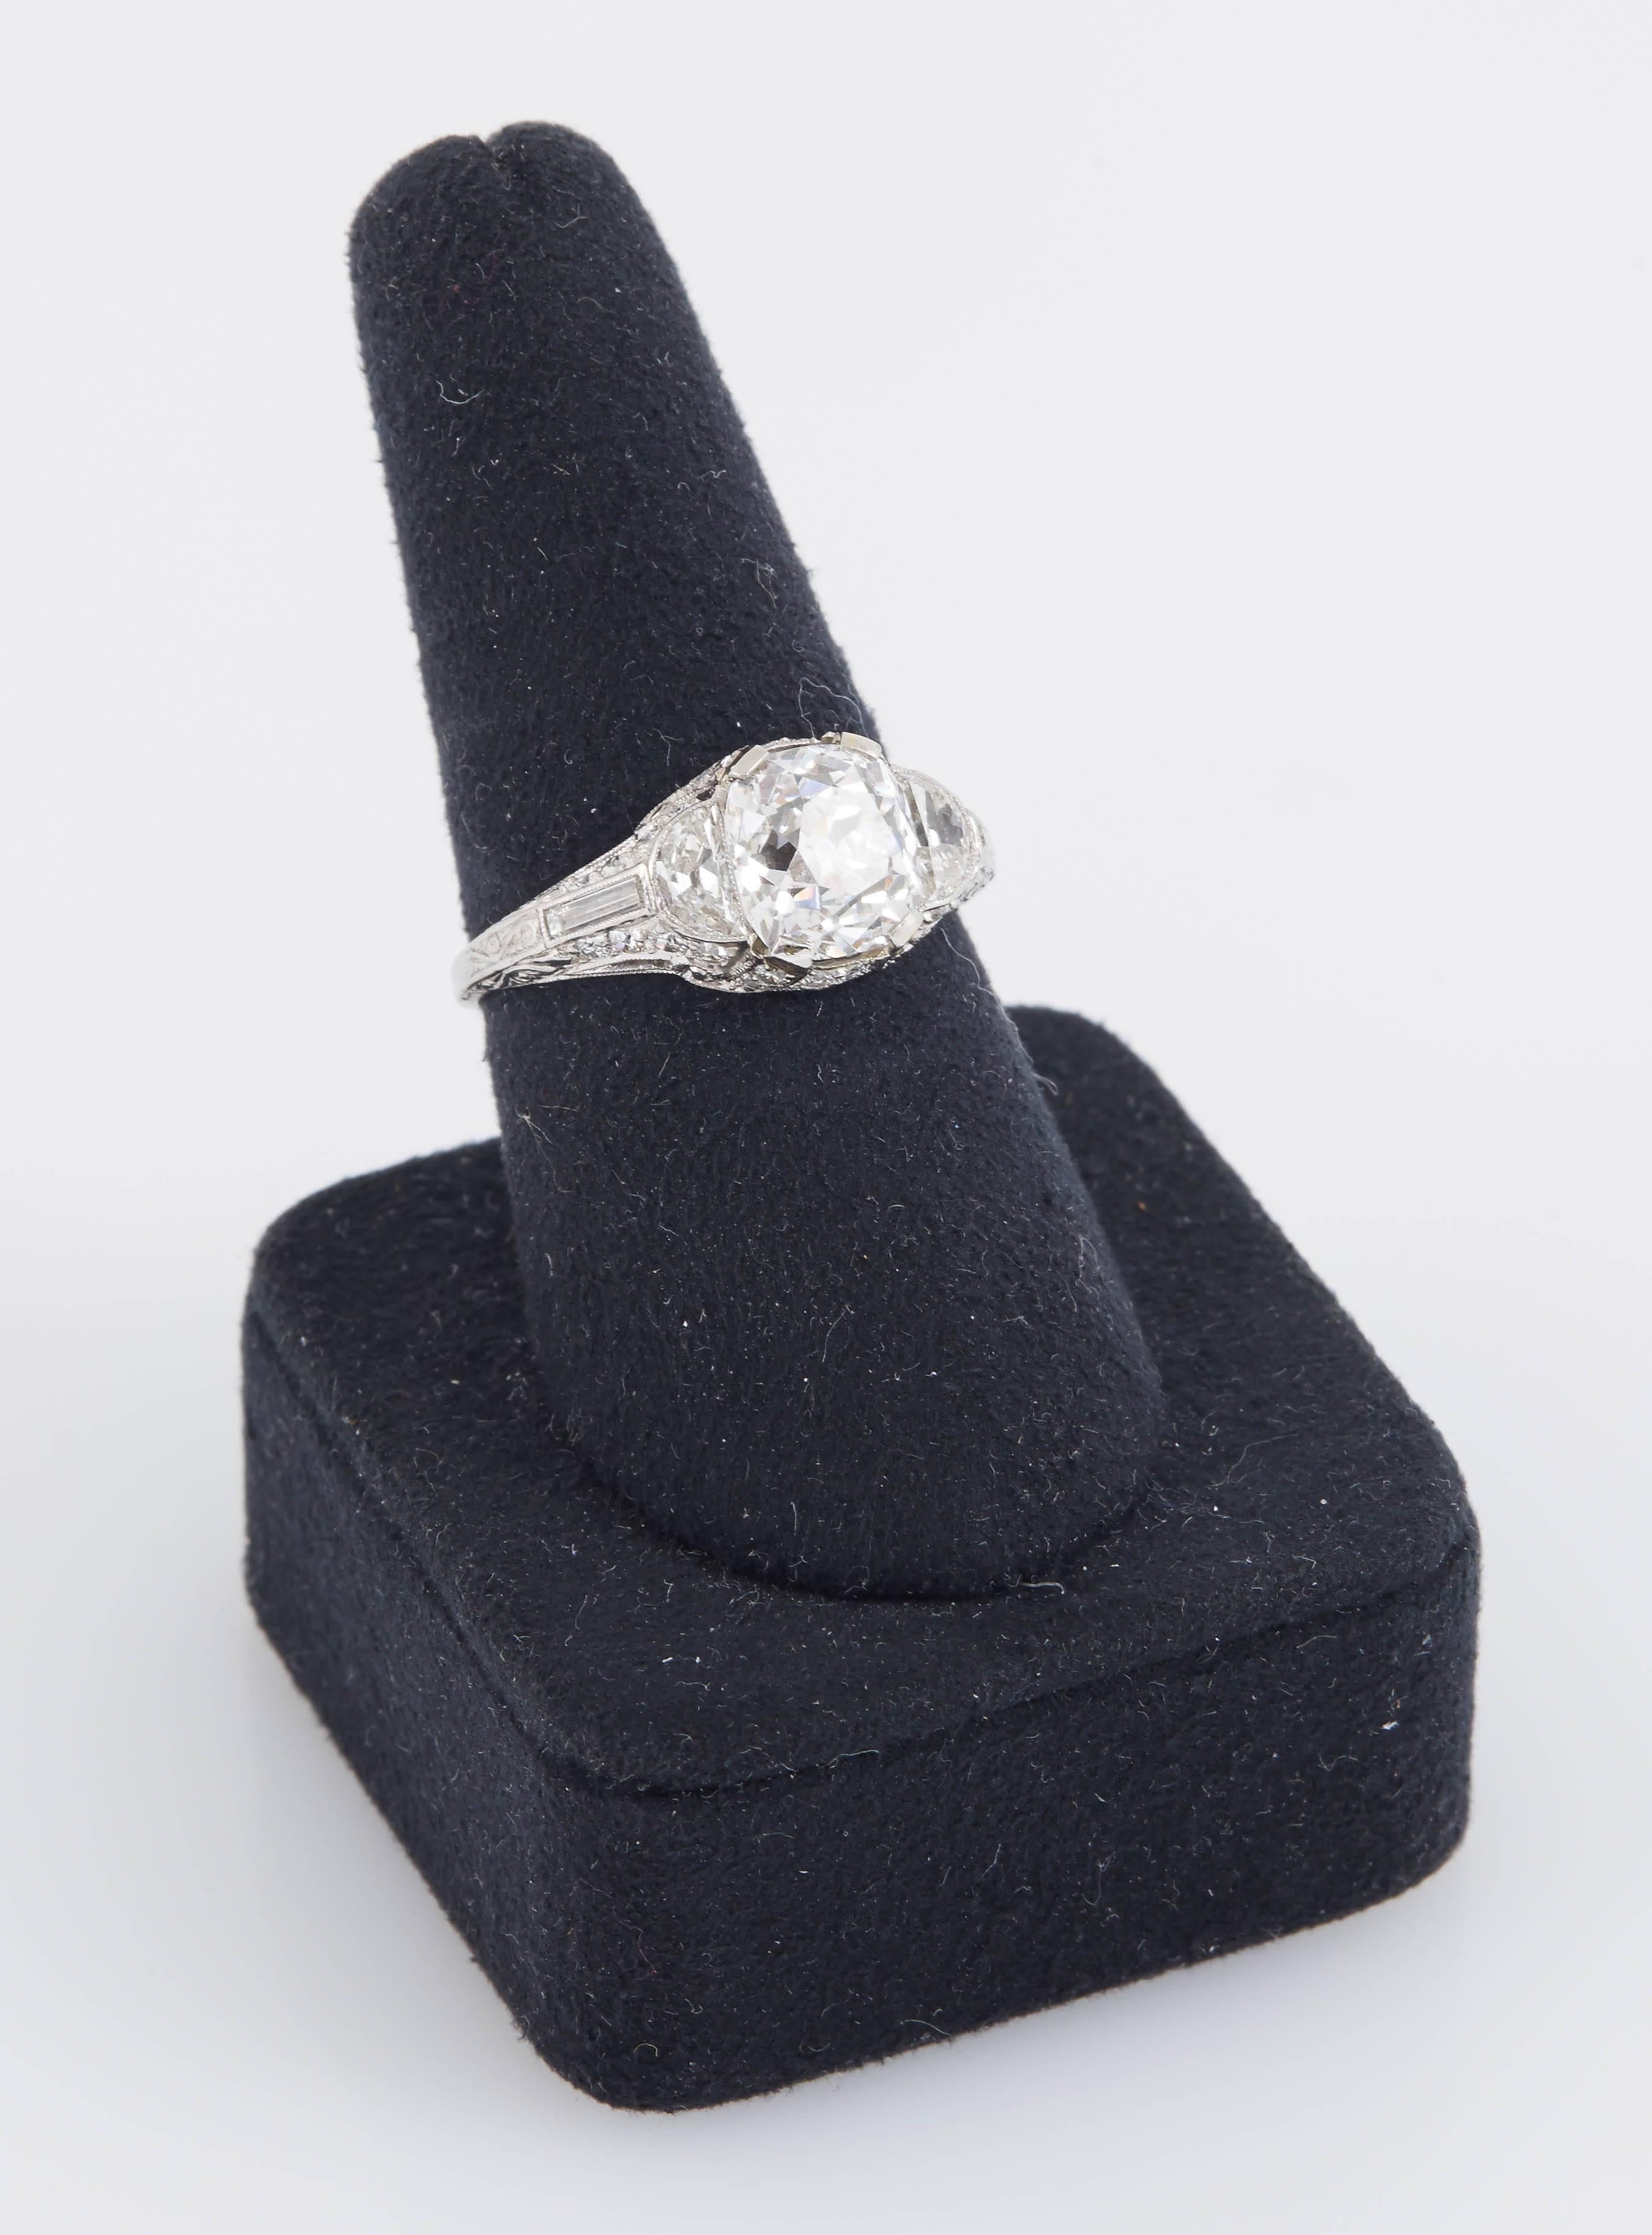 Antique Art Deco engagement ring finely crafted in platinum with GIA certified Old Mine Cushion cut diamond at the center weighing 3.00 carat, D color VS1 clarity. 